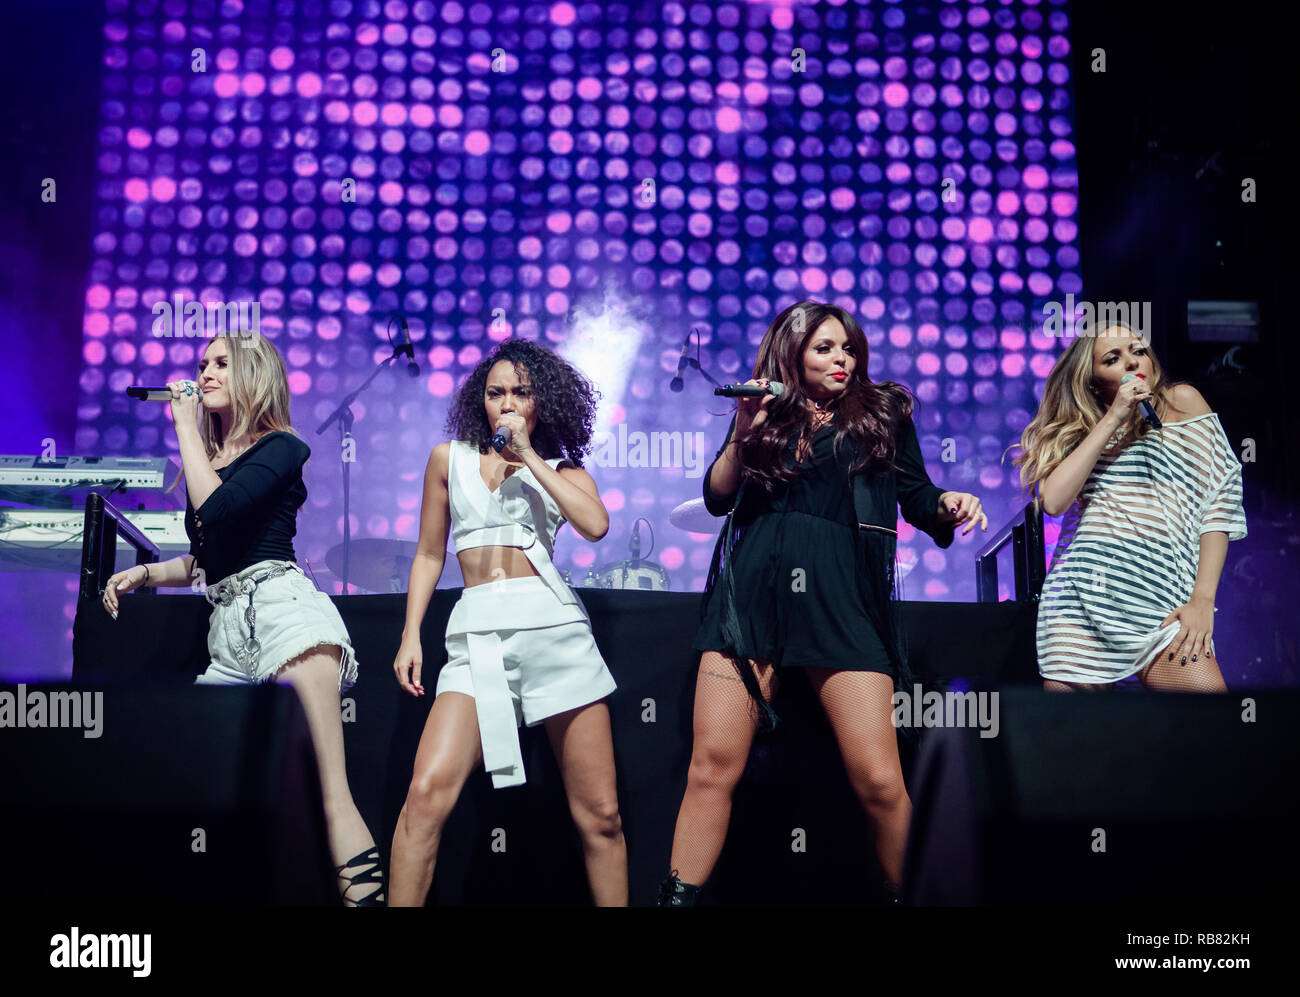 angst udrydde at tilbagetrække The British girl and vocal group Little Mix performs a live concert at the  Danish musical show The Voice '15 in Copenhagen. The group consists of Jade  Thirlwall, Perrie Edwards, Leigh-Anne Pinnock,